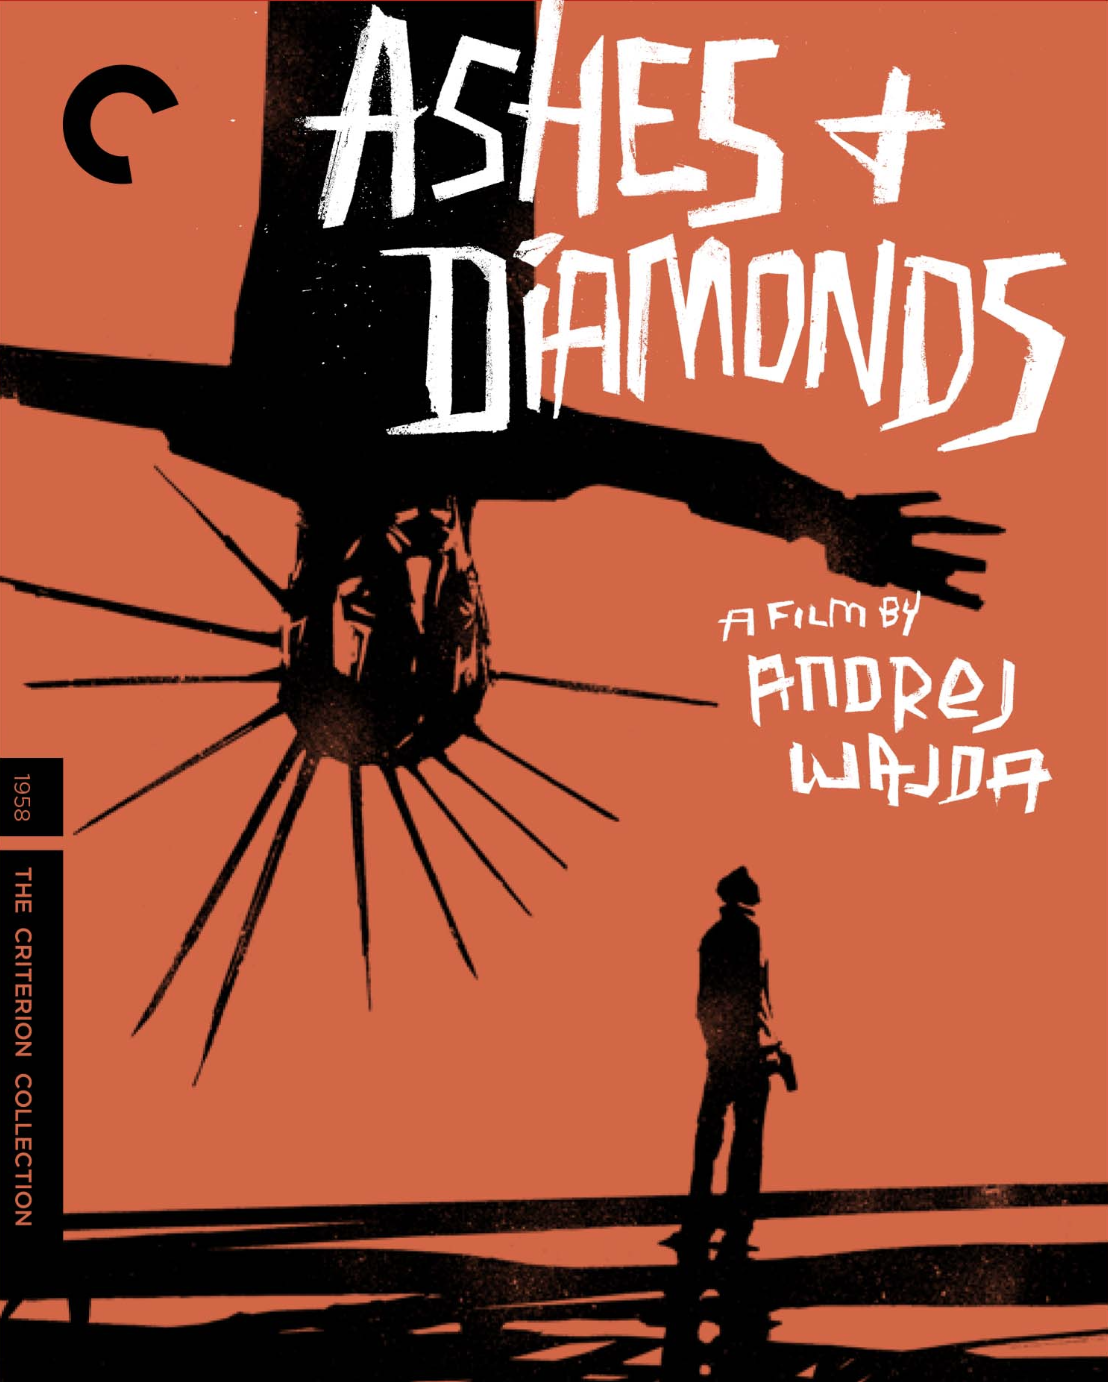 The Criterion Collection: Ashes + Diamonds